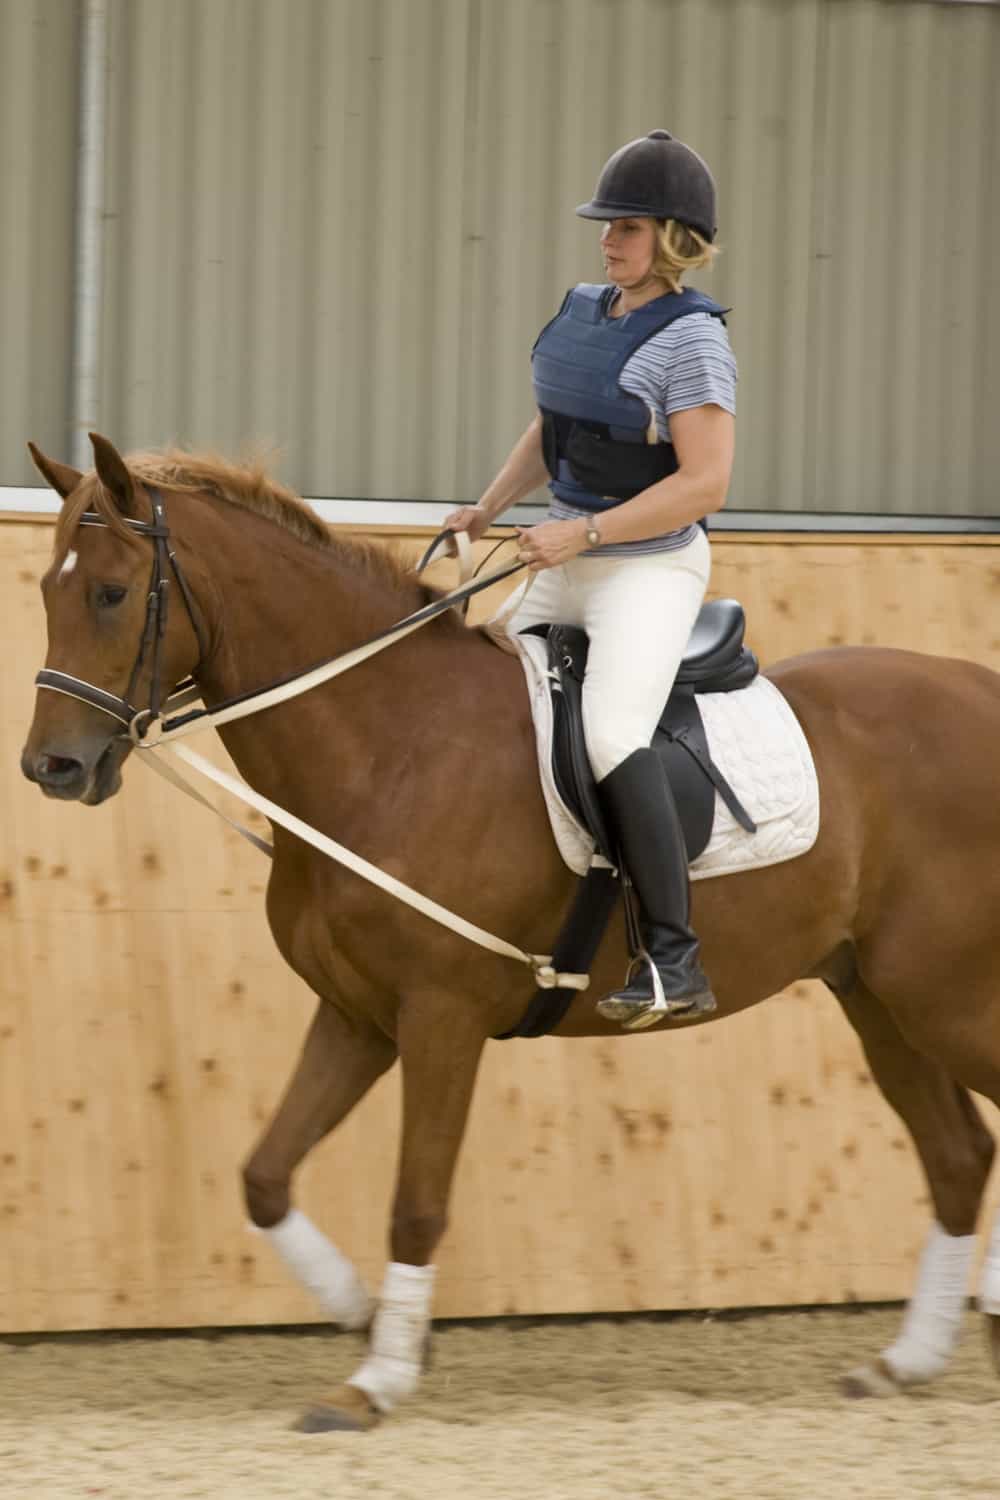 Mistakes to Avoid When Cantering on a Horse